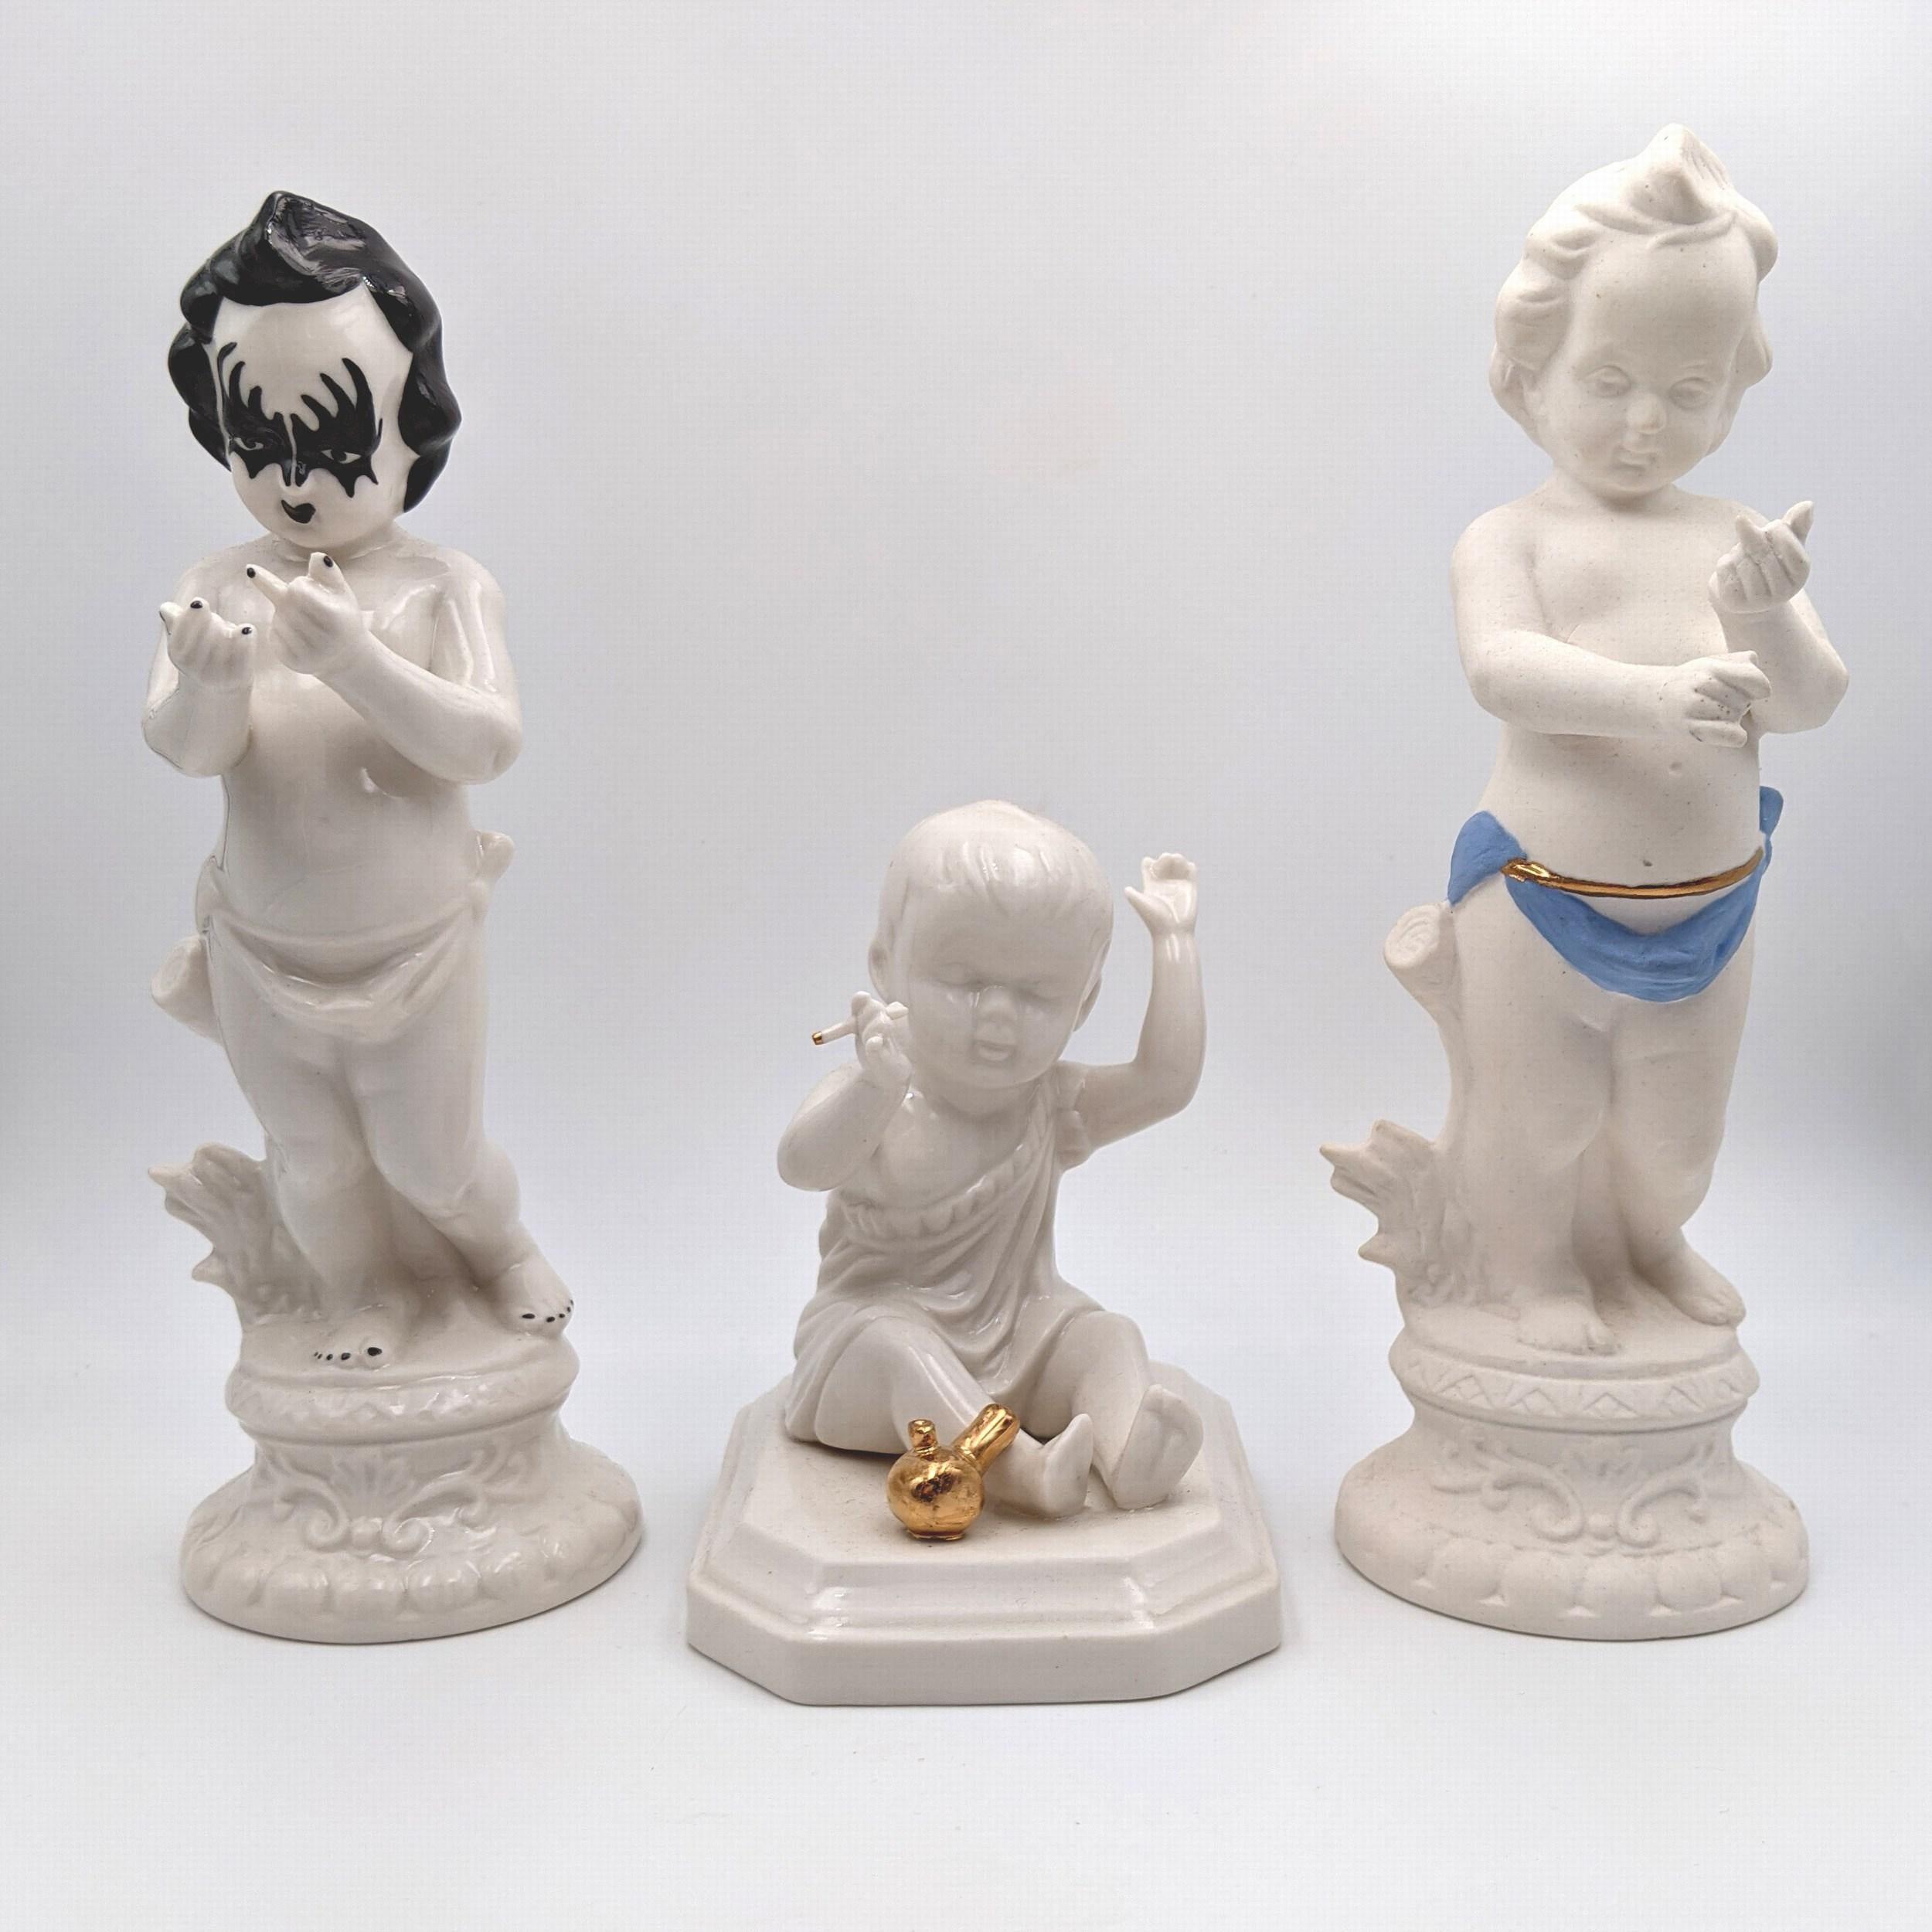 Jen Watson
Rude Cherub (KISS Paint)
Year: 2021
Medium: Porcelain, Glaze, Luster 
Size: 8 x 2.25 x 3.5 inches
Signed
COA included

About Jen Watson:

My figurines exist somewhere between relic and homage, honoring the tradition of the figurine and